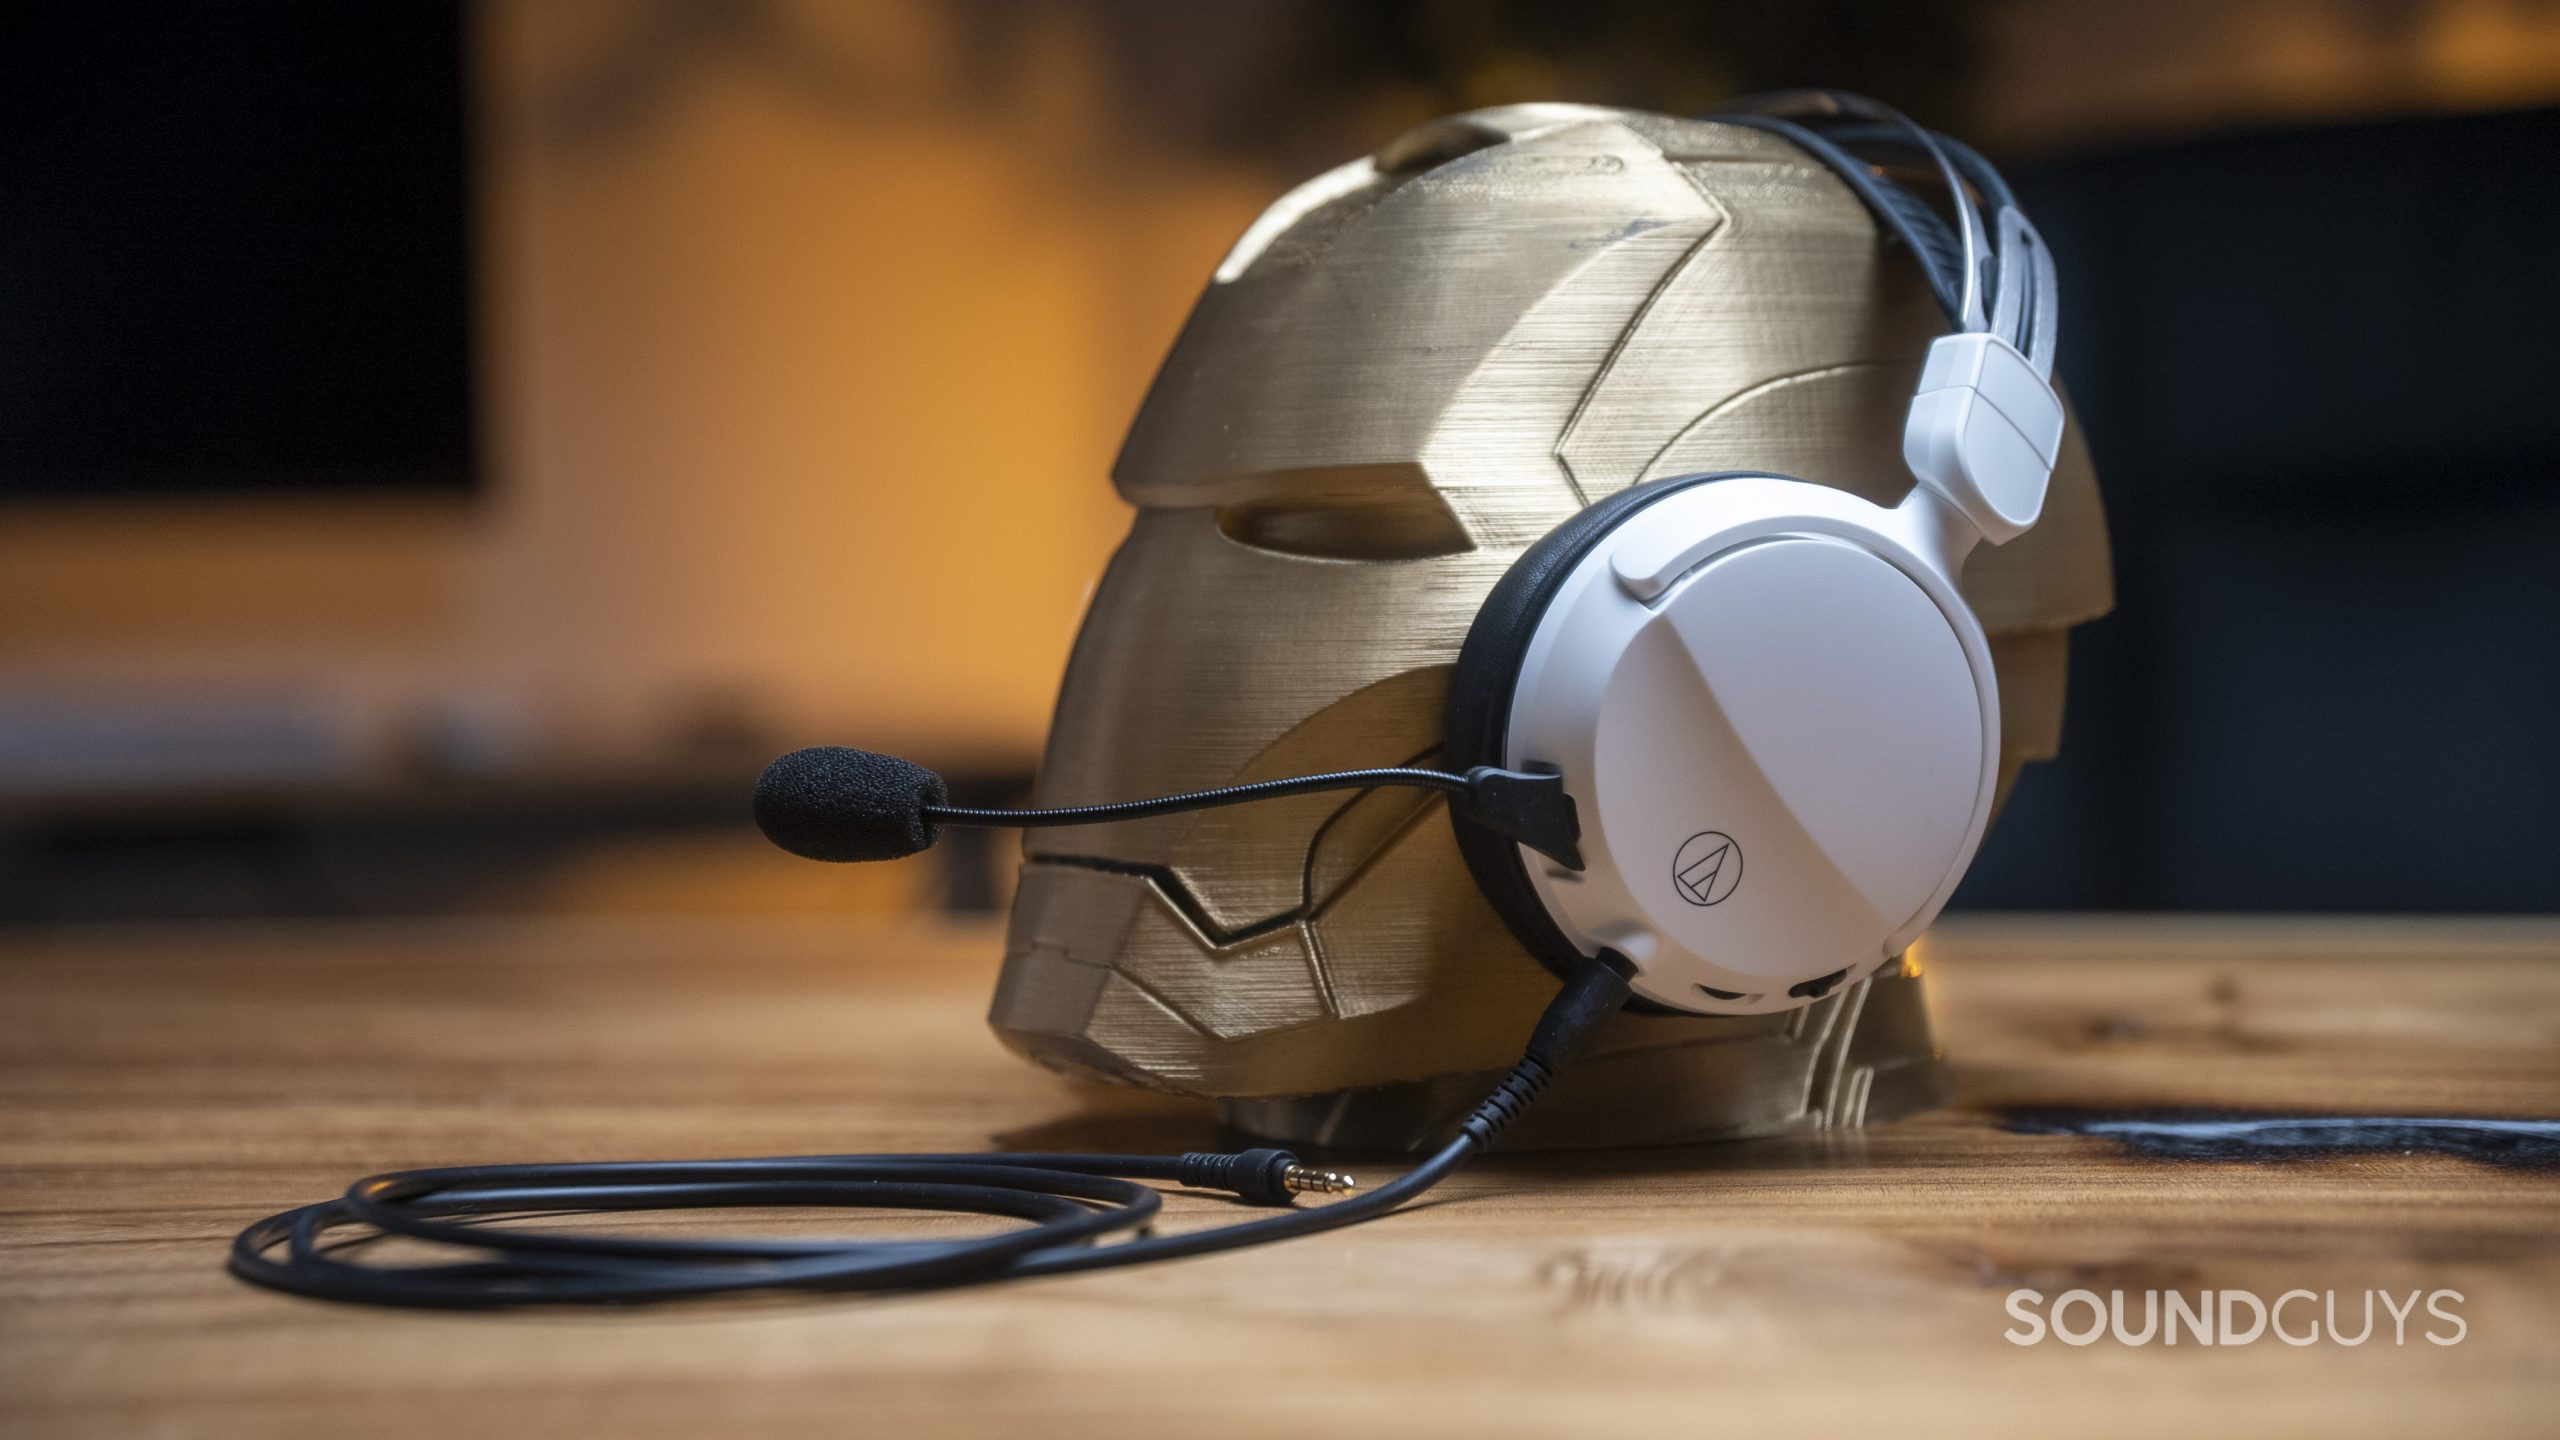 The Audio-Technica ATH-GL3 gaming headset adorns an wooden Iron Man head.